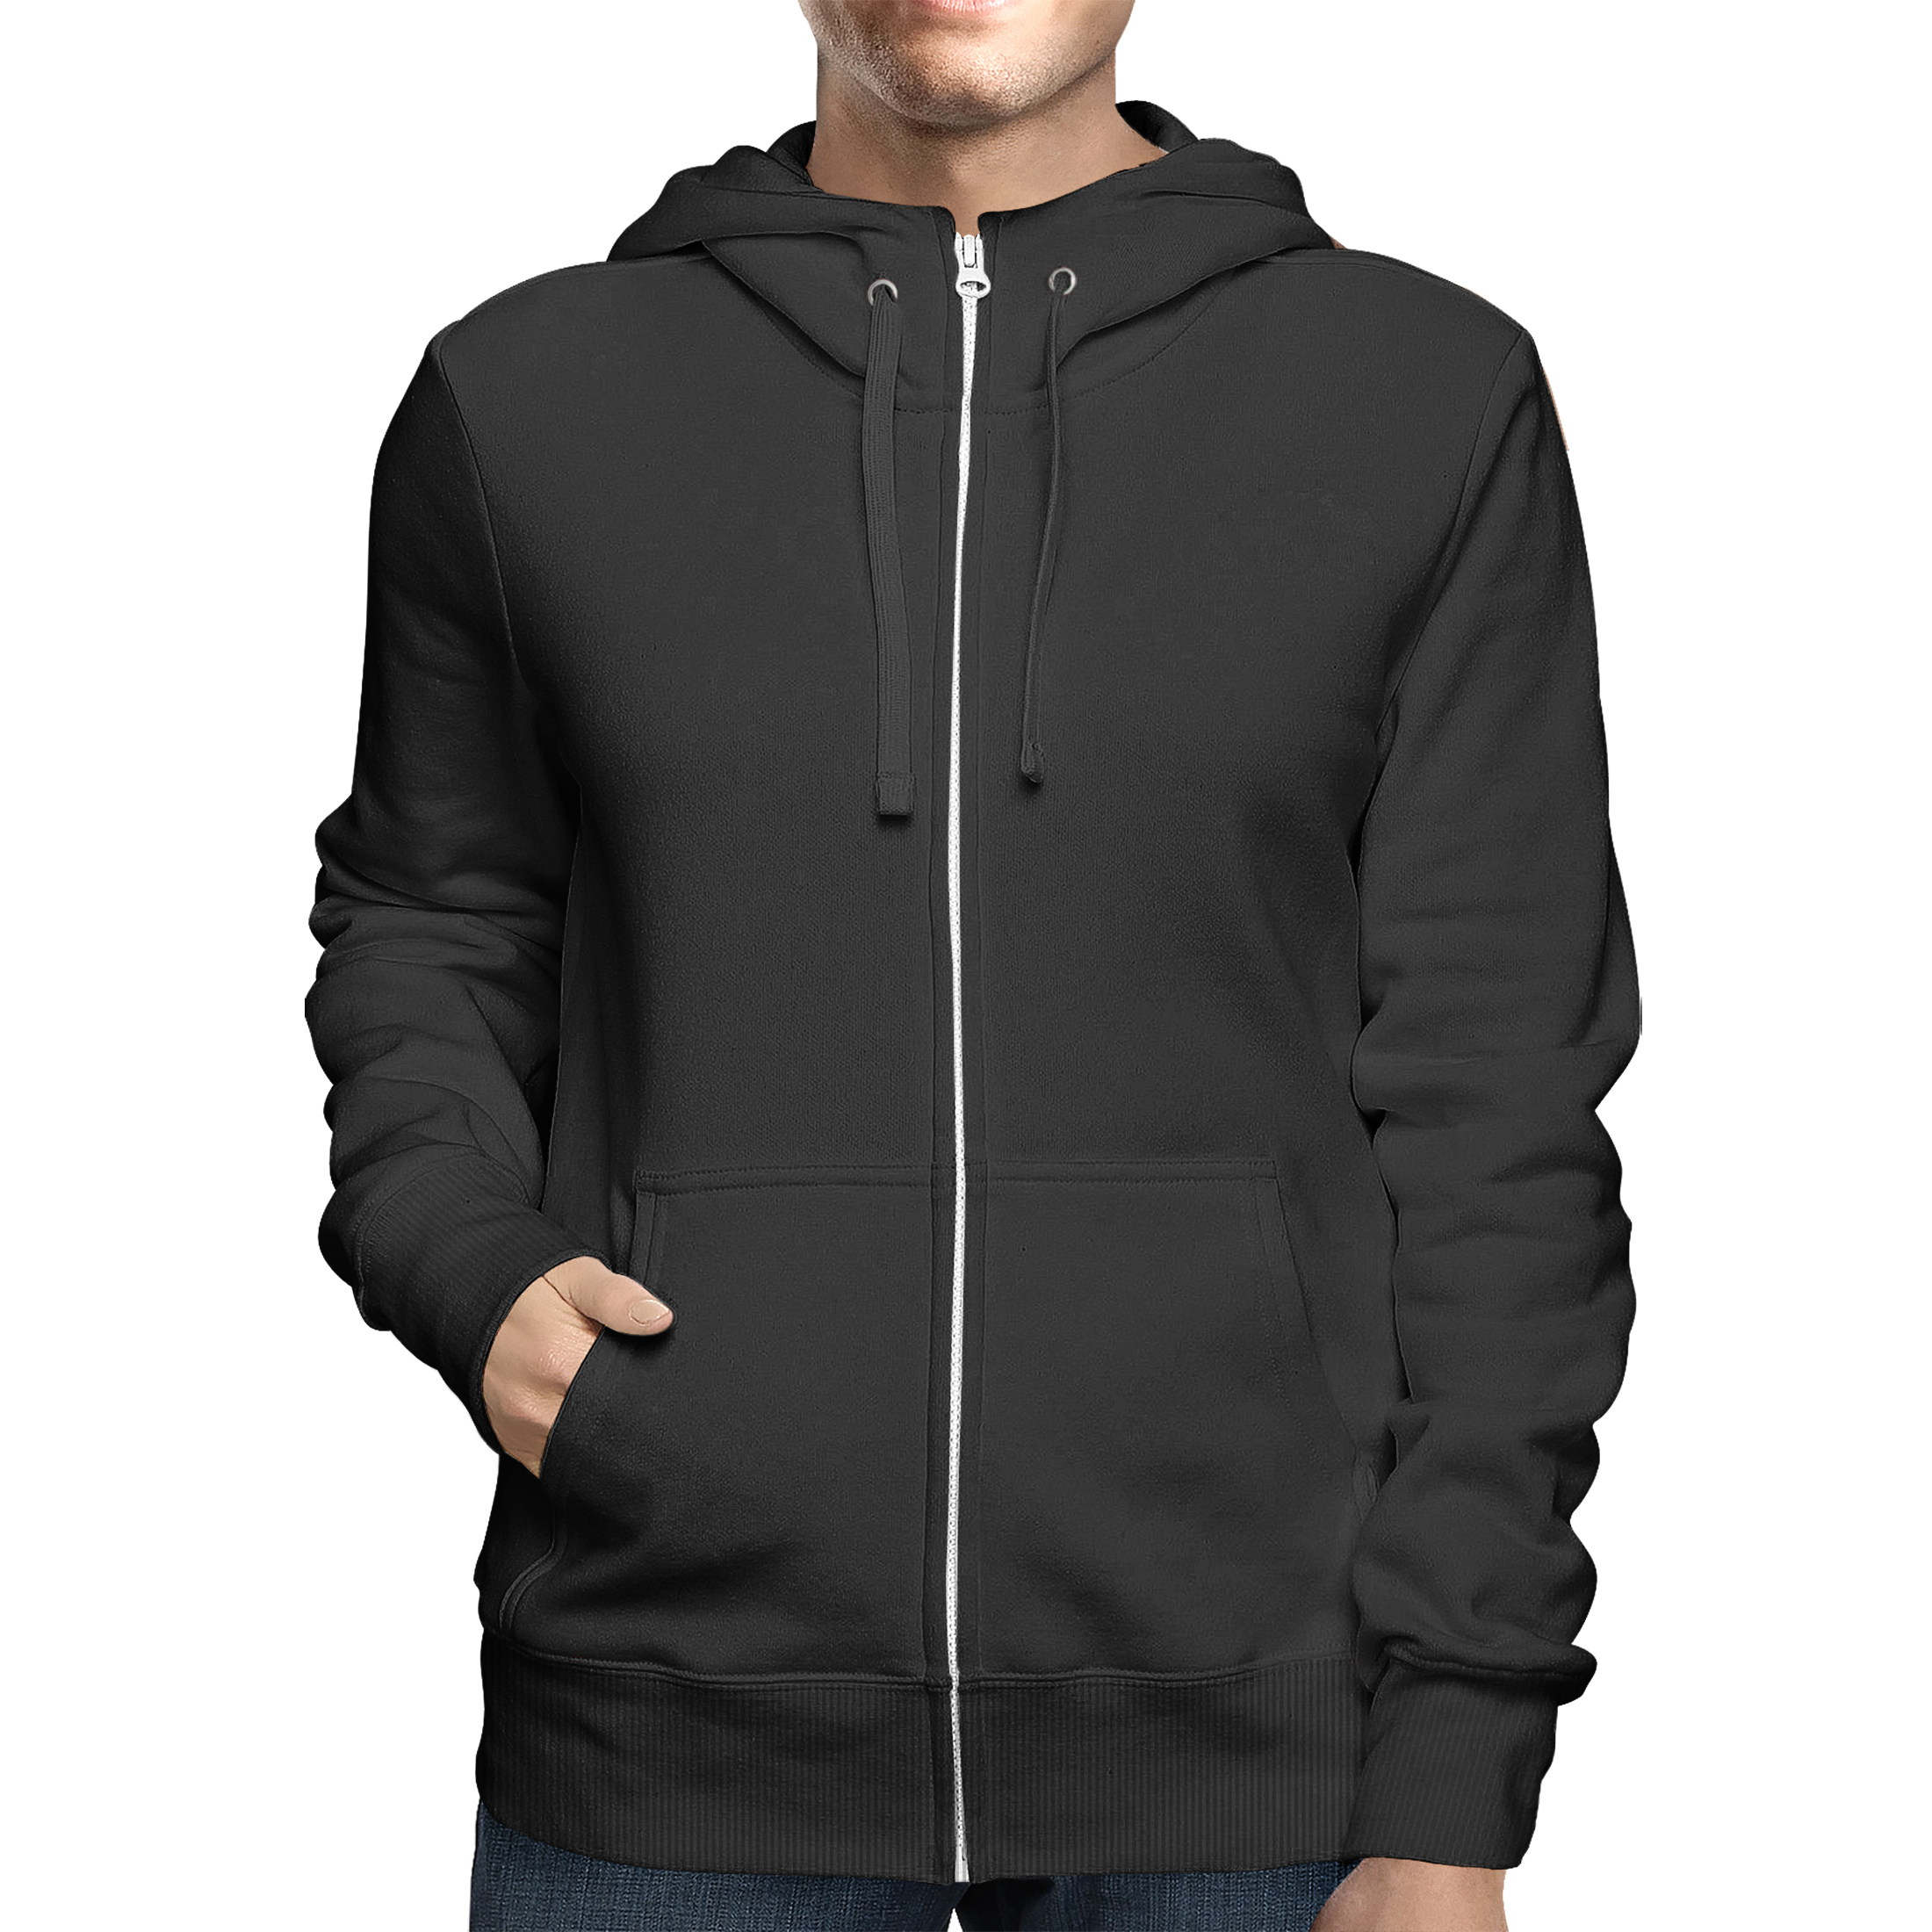 2-Pack: Men's Full Zip Up Fleece-Lined Hoodie Sweatshirt (Big & Tall Size Available) - Black, 3x-large